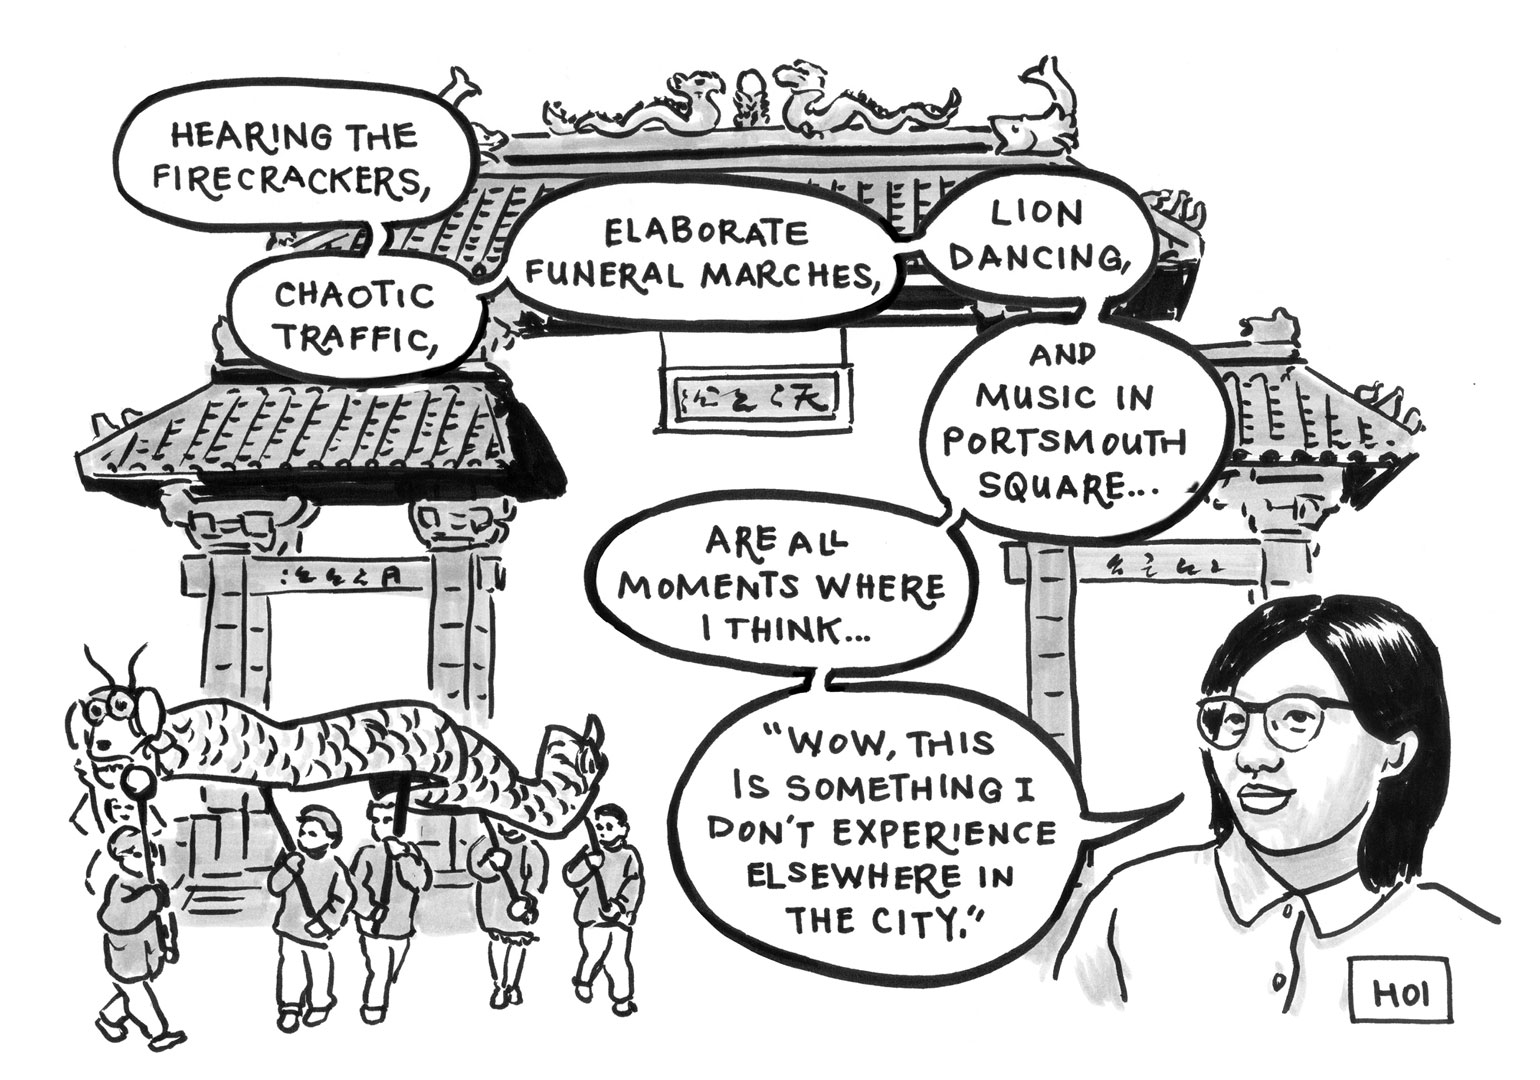 Alive & Present: Cultural Belonging in SF Chinatown and Manilatown, image of Hoi, a young Asian American woman, standing in front of the dragon gate, saying an excerpt of the accompanying quote, drawn in comic book (black and white) style